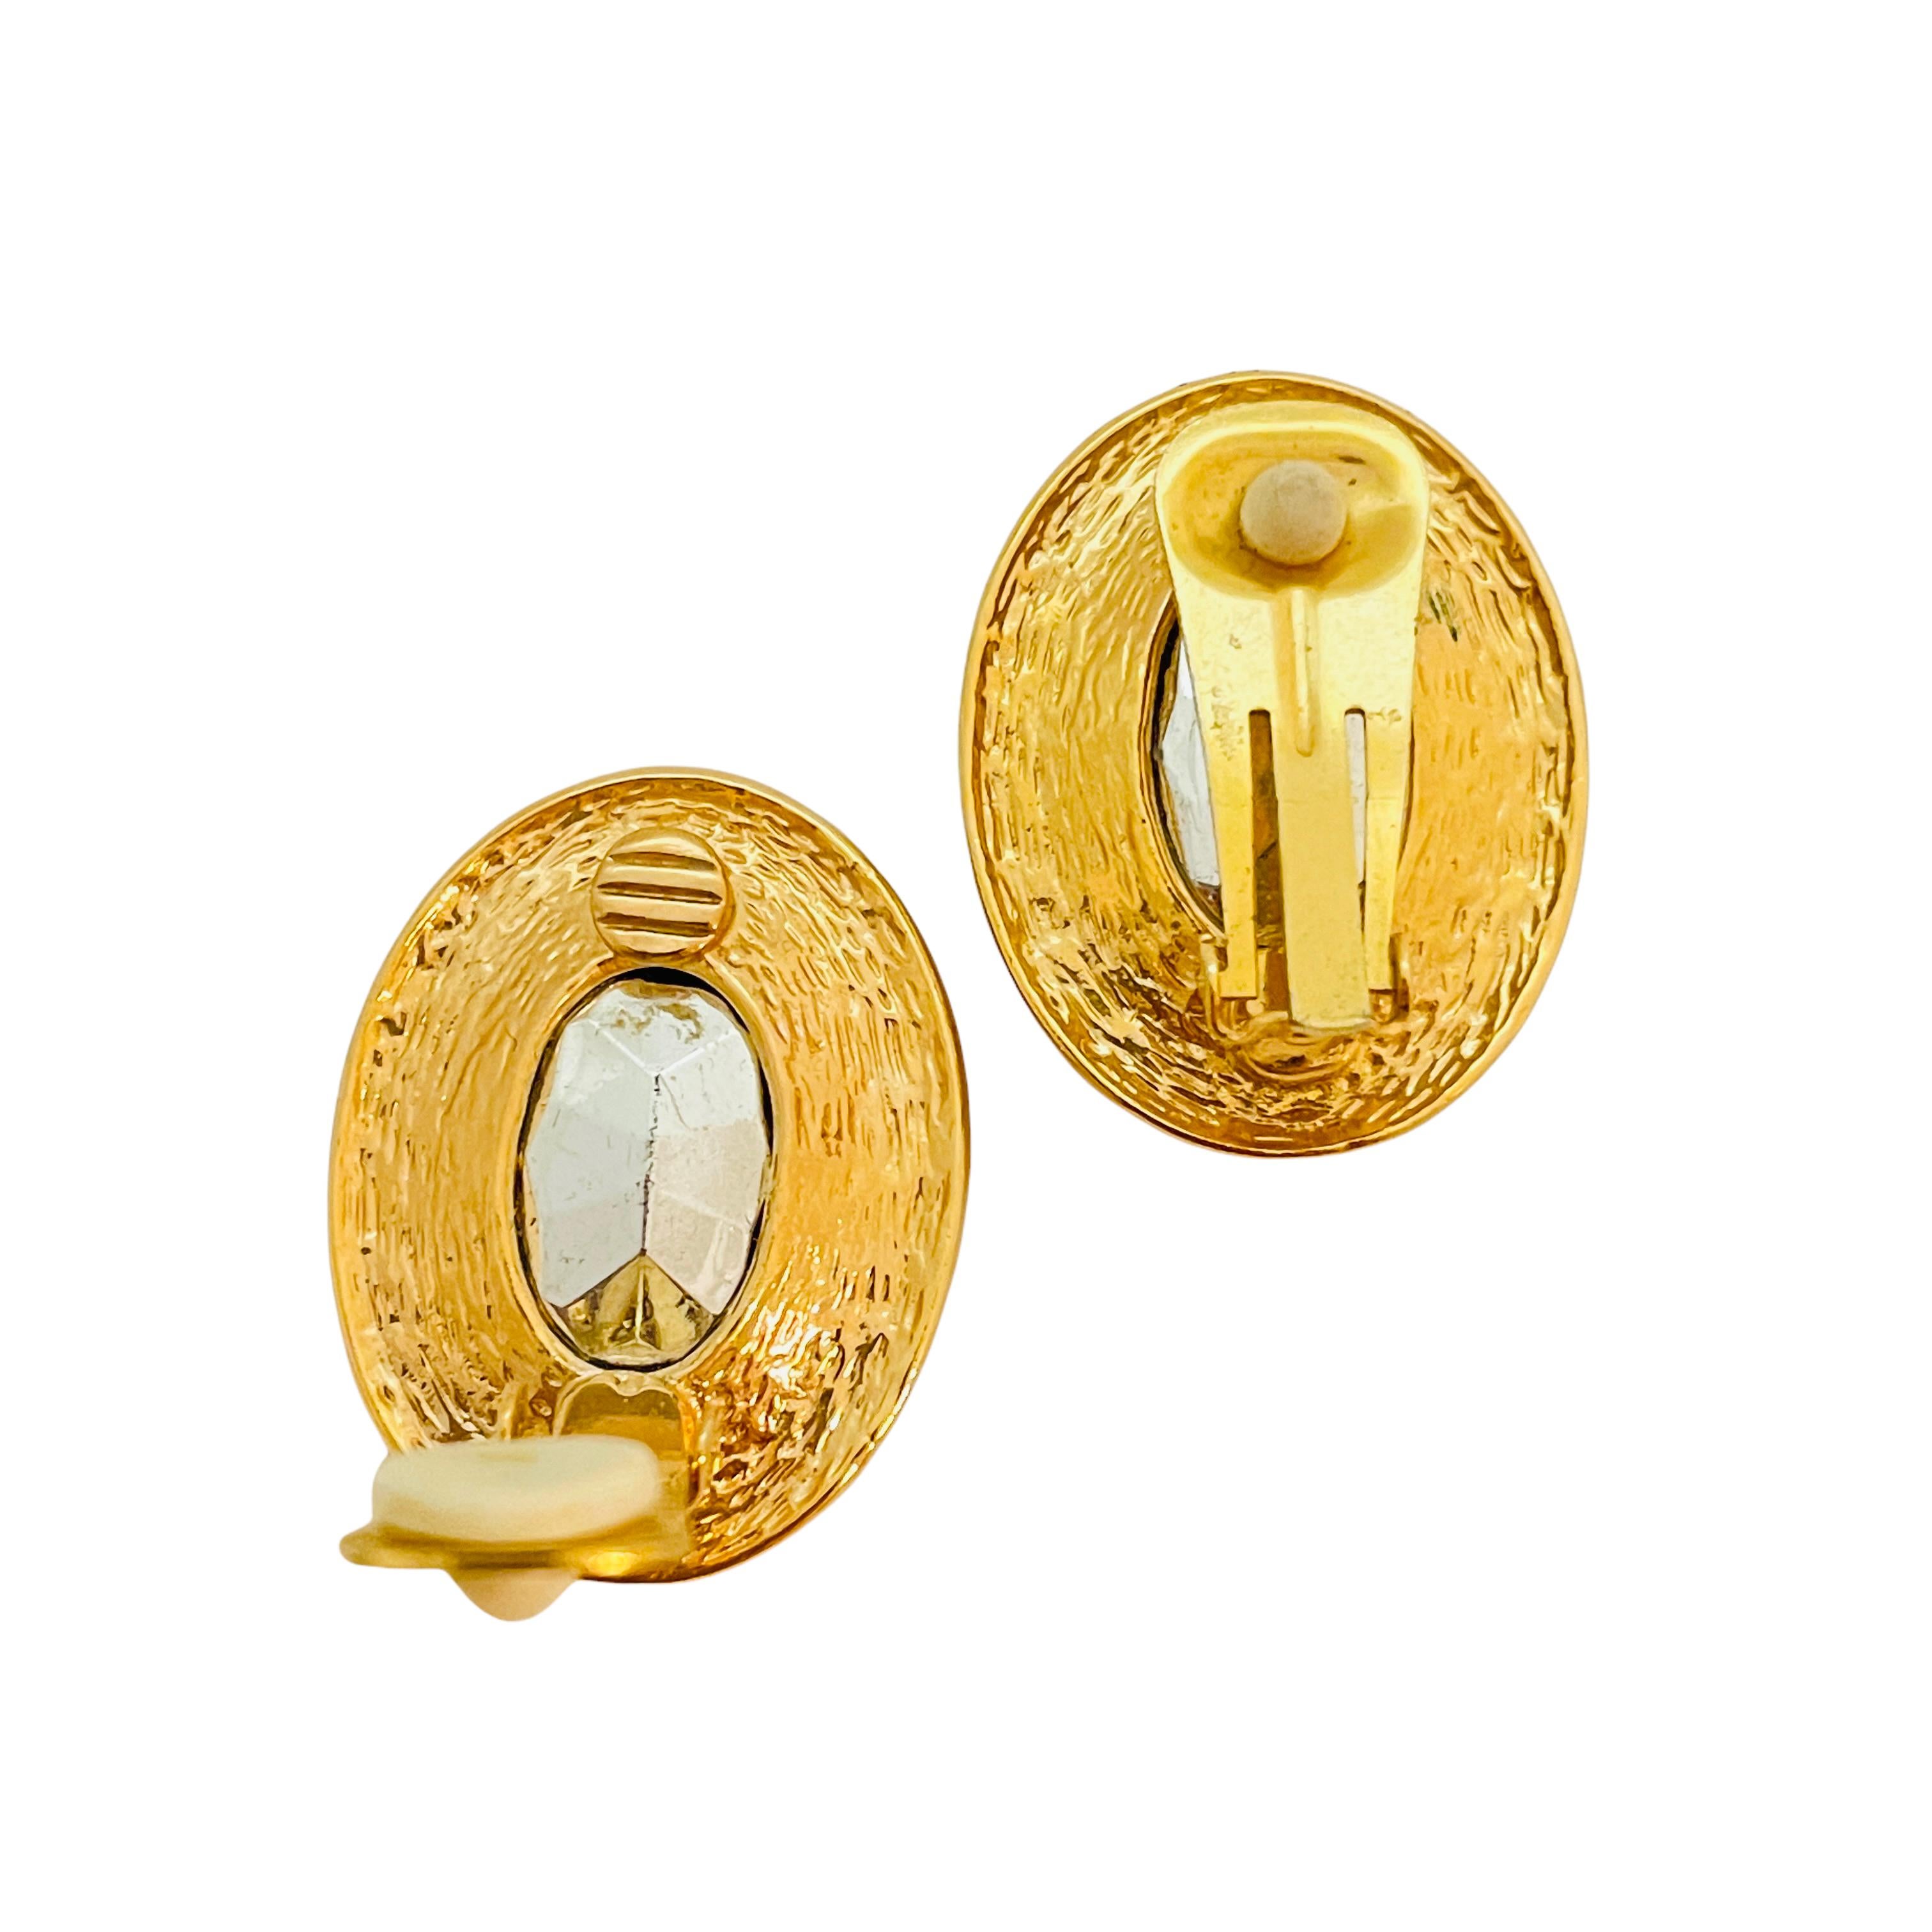 Vintage gold faceted glass designer runway clip on earrings In Good Condition For Sale In Palos Hills, IL